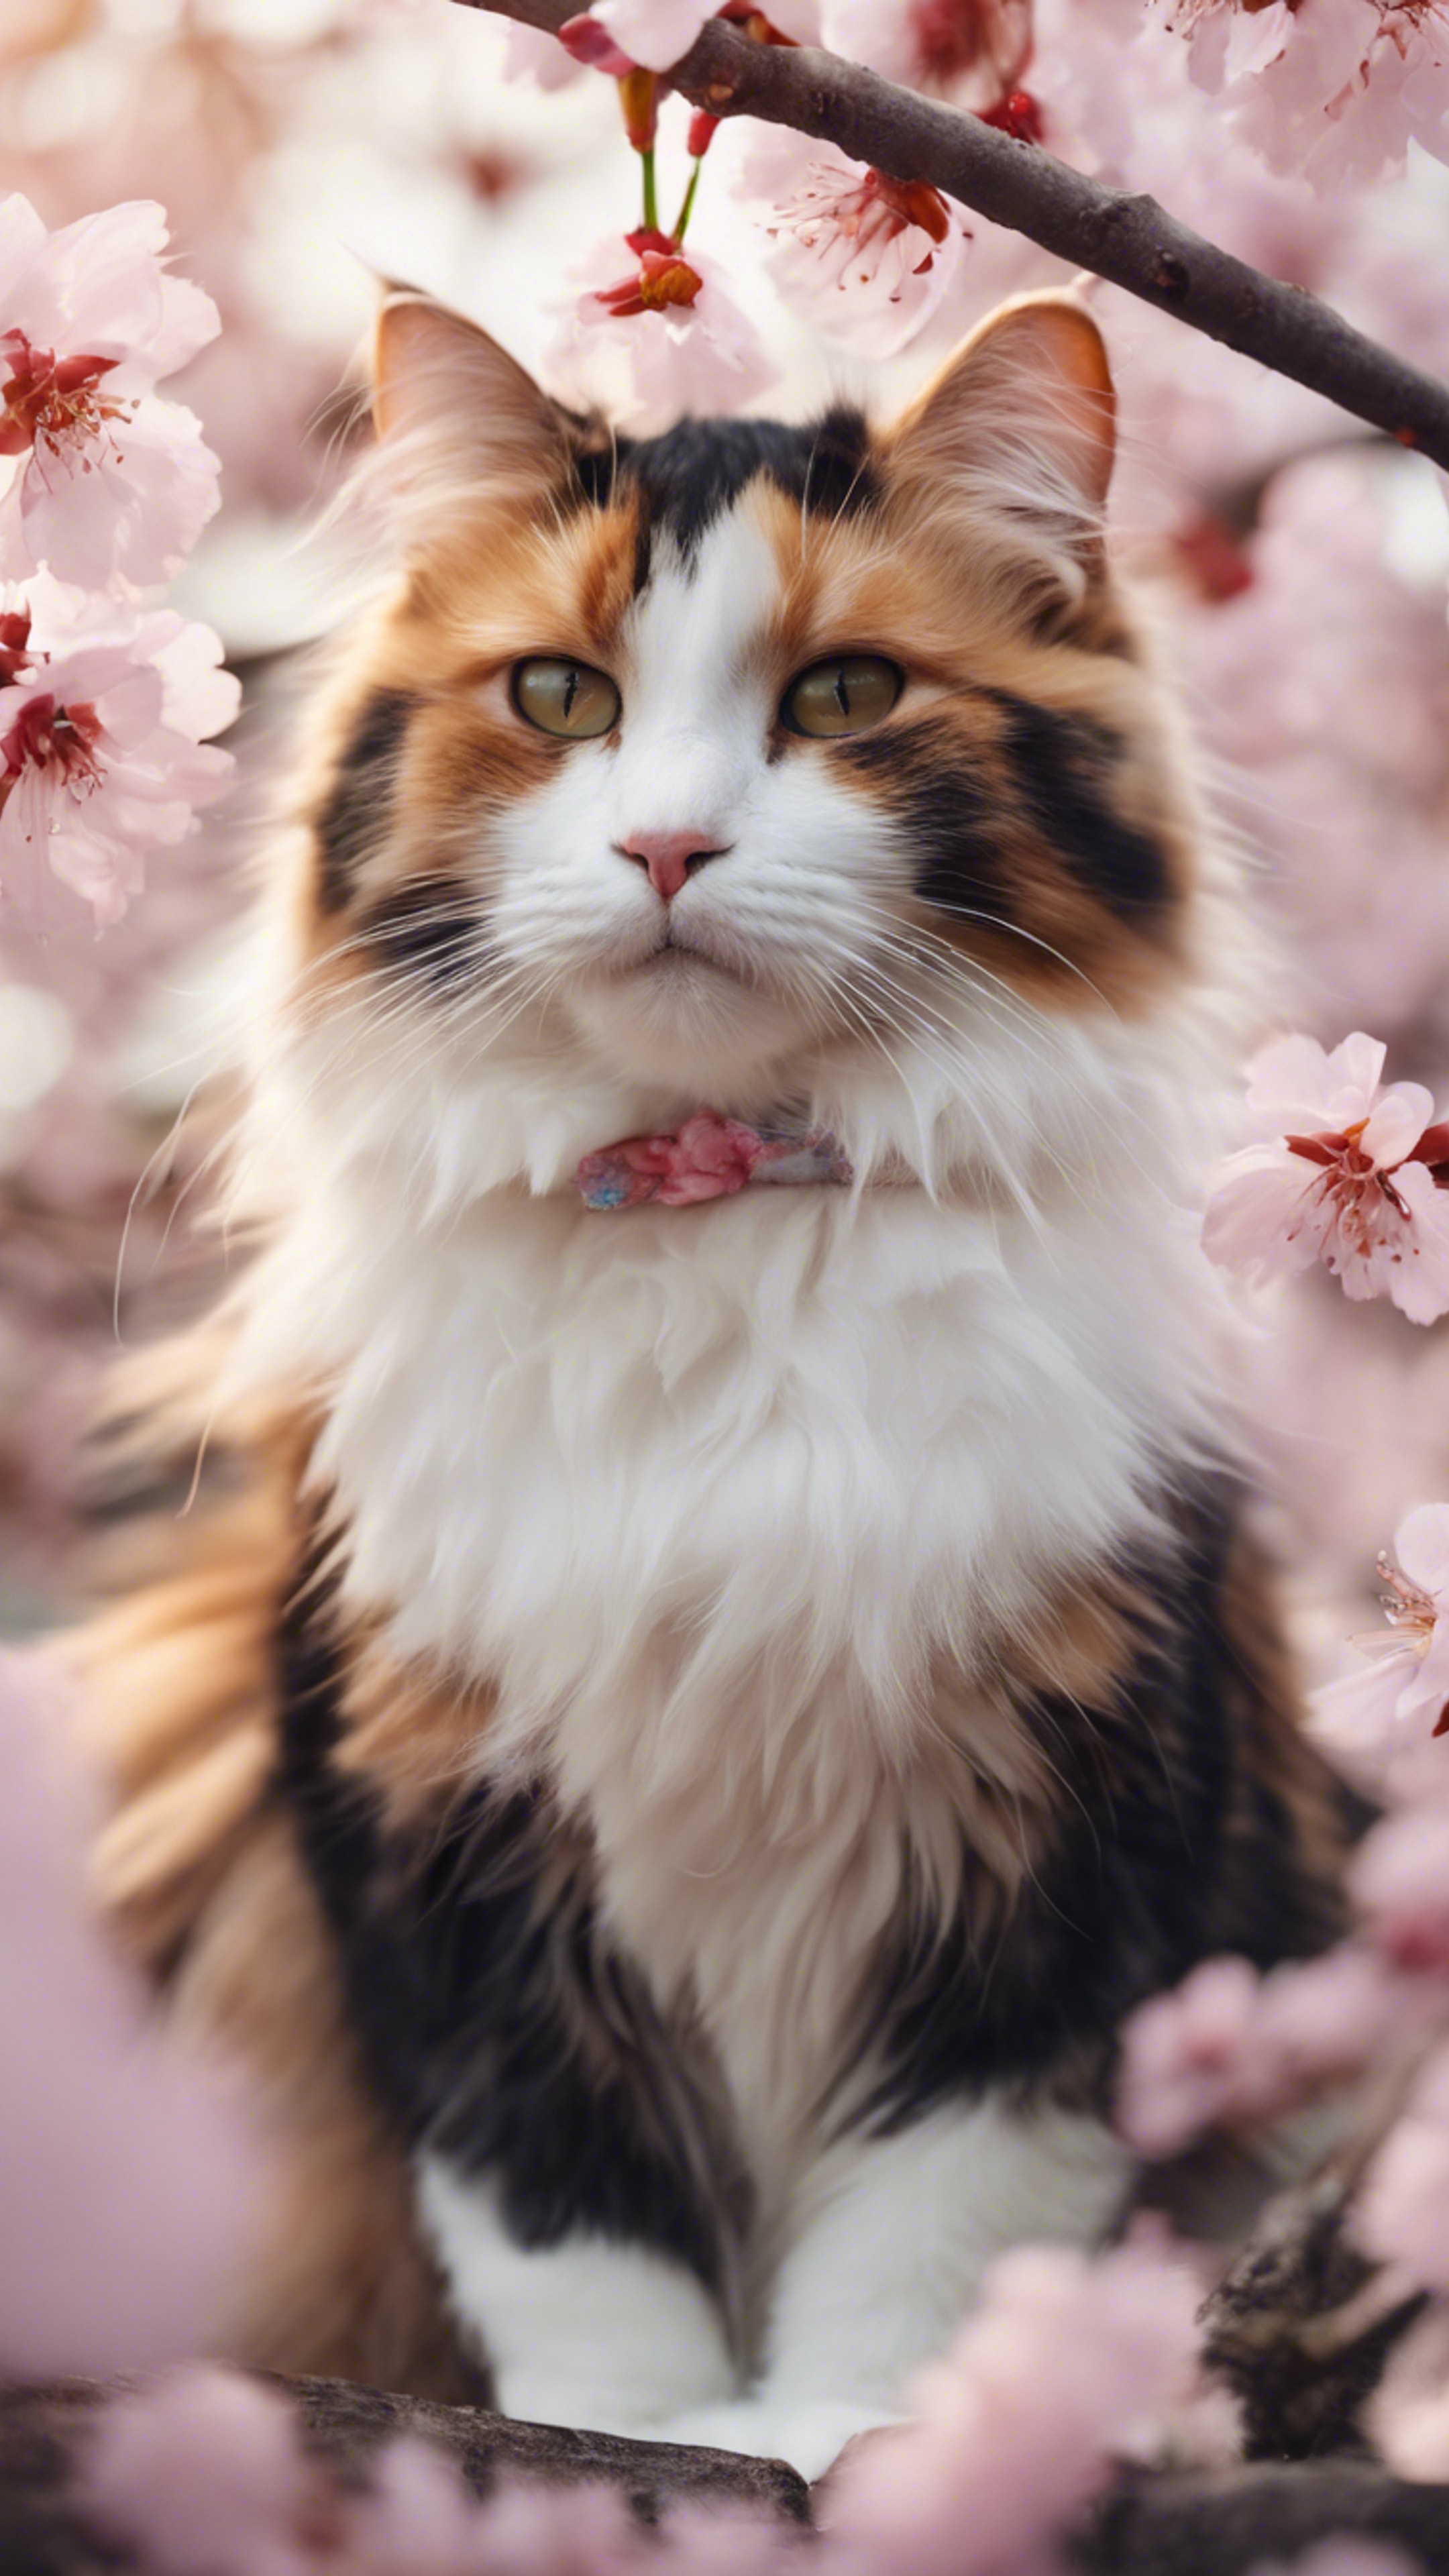 A fluffy calico cat in a cute pose sitting amongst cherry blossoms. Fond d'écran[3cf3847c7c9c4f38aba7]